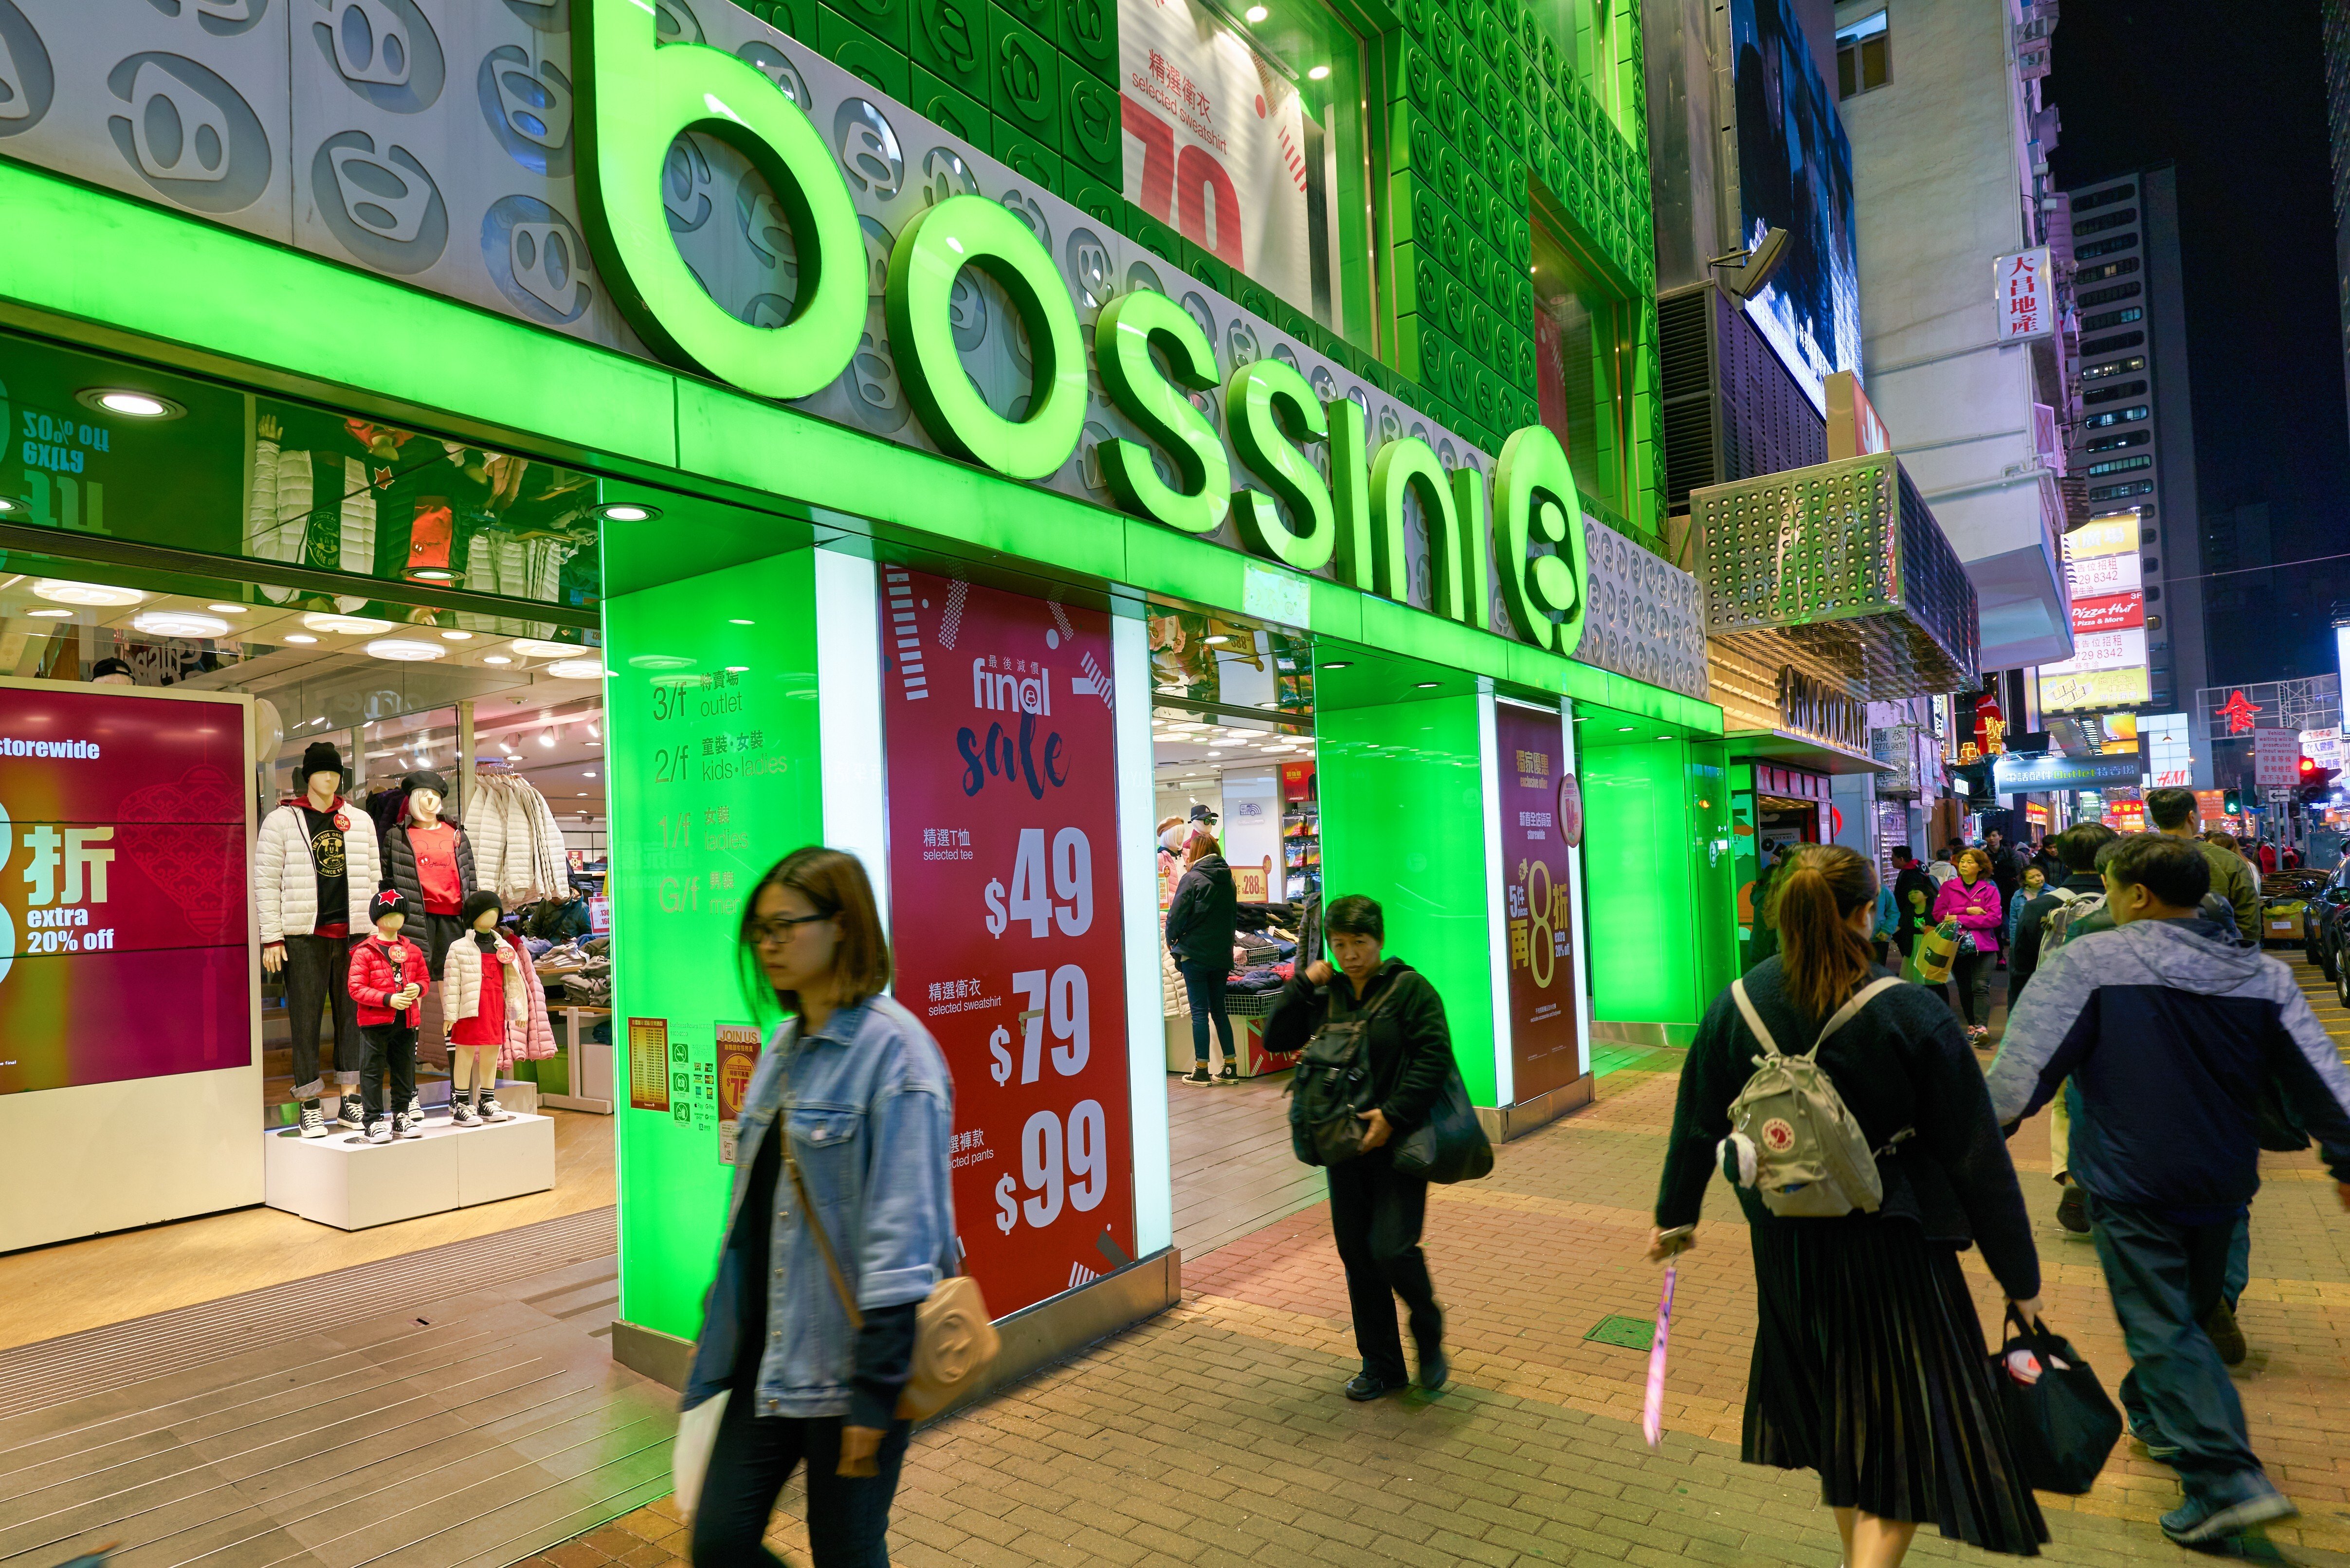 Bossini shops are a common sight in Hong Kong. Photo: Shutterstock